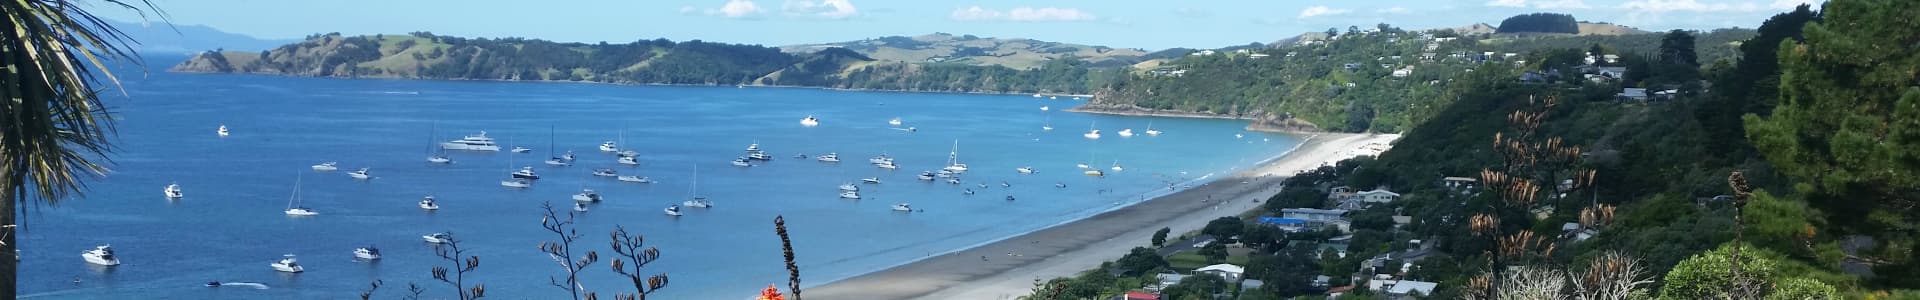 Panorama of boats in the harbour on Waiheke